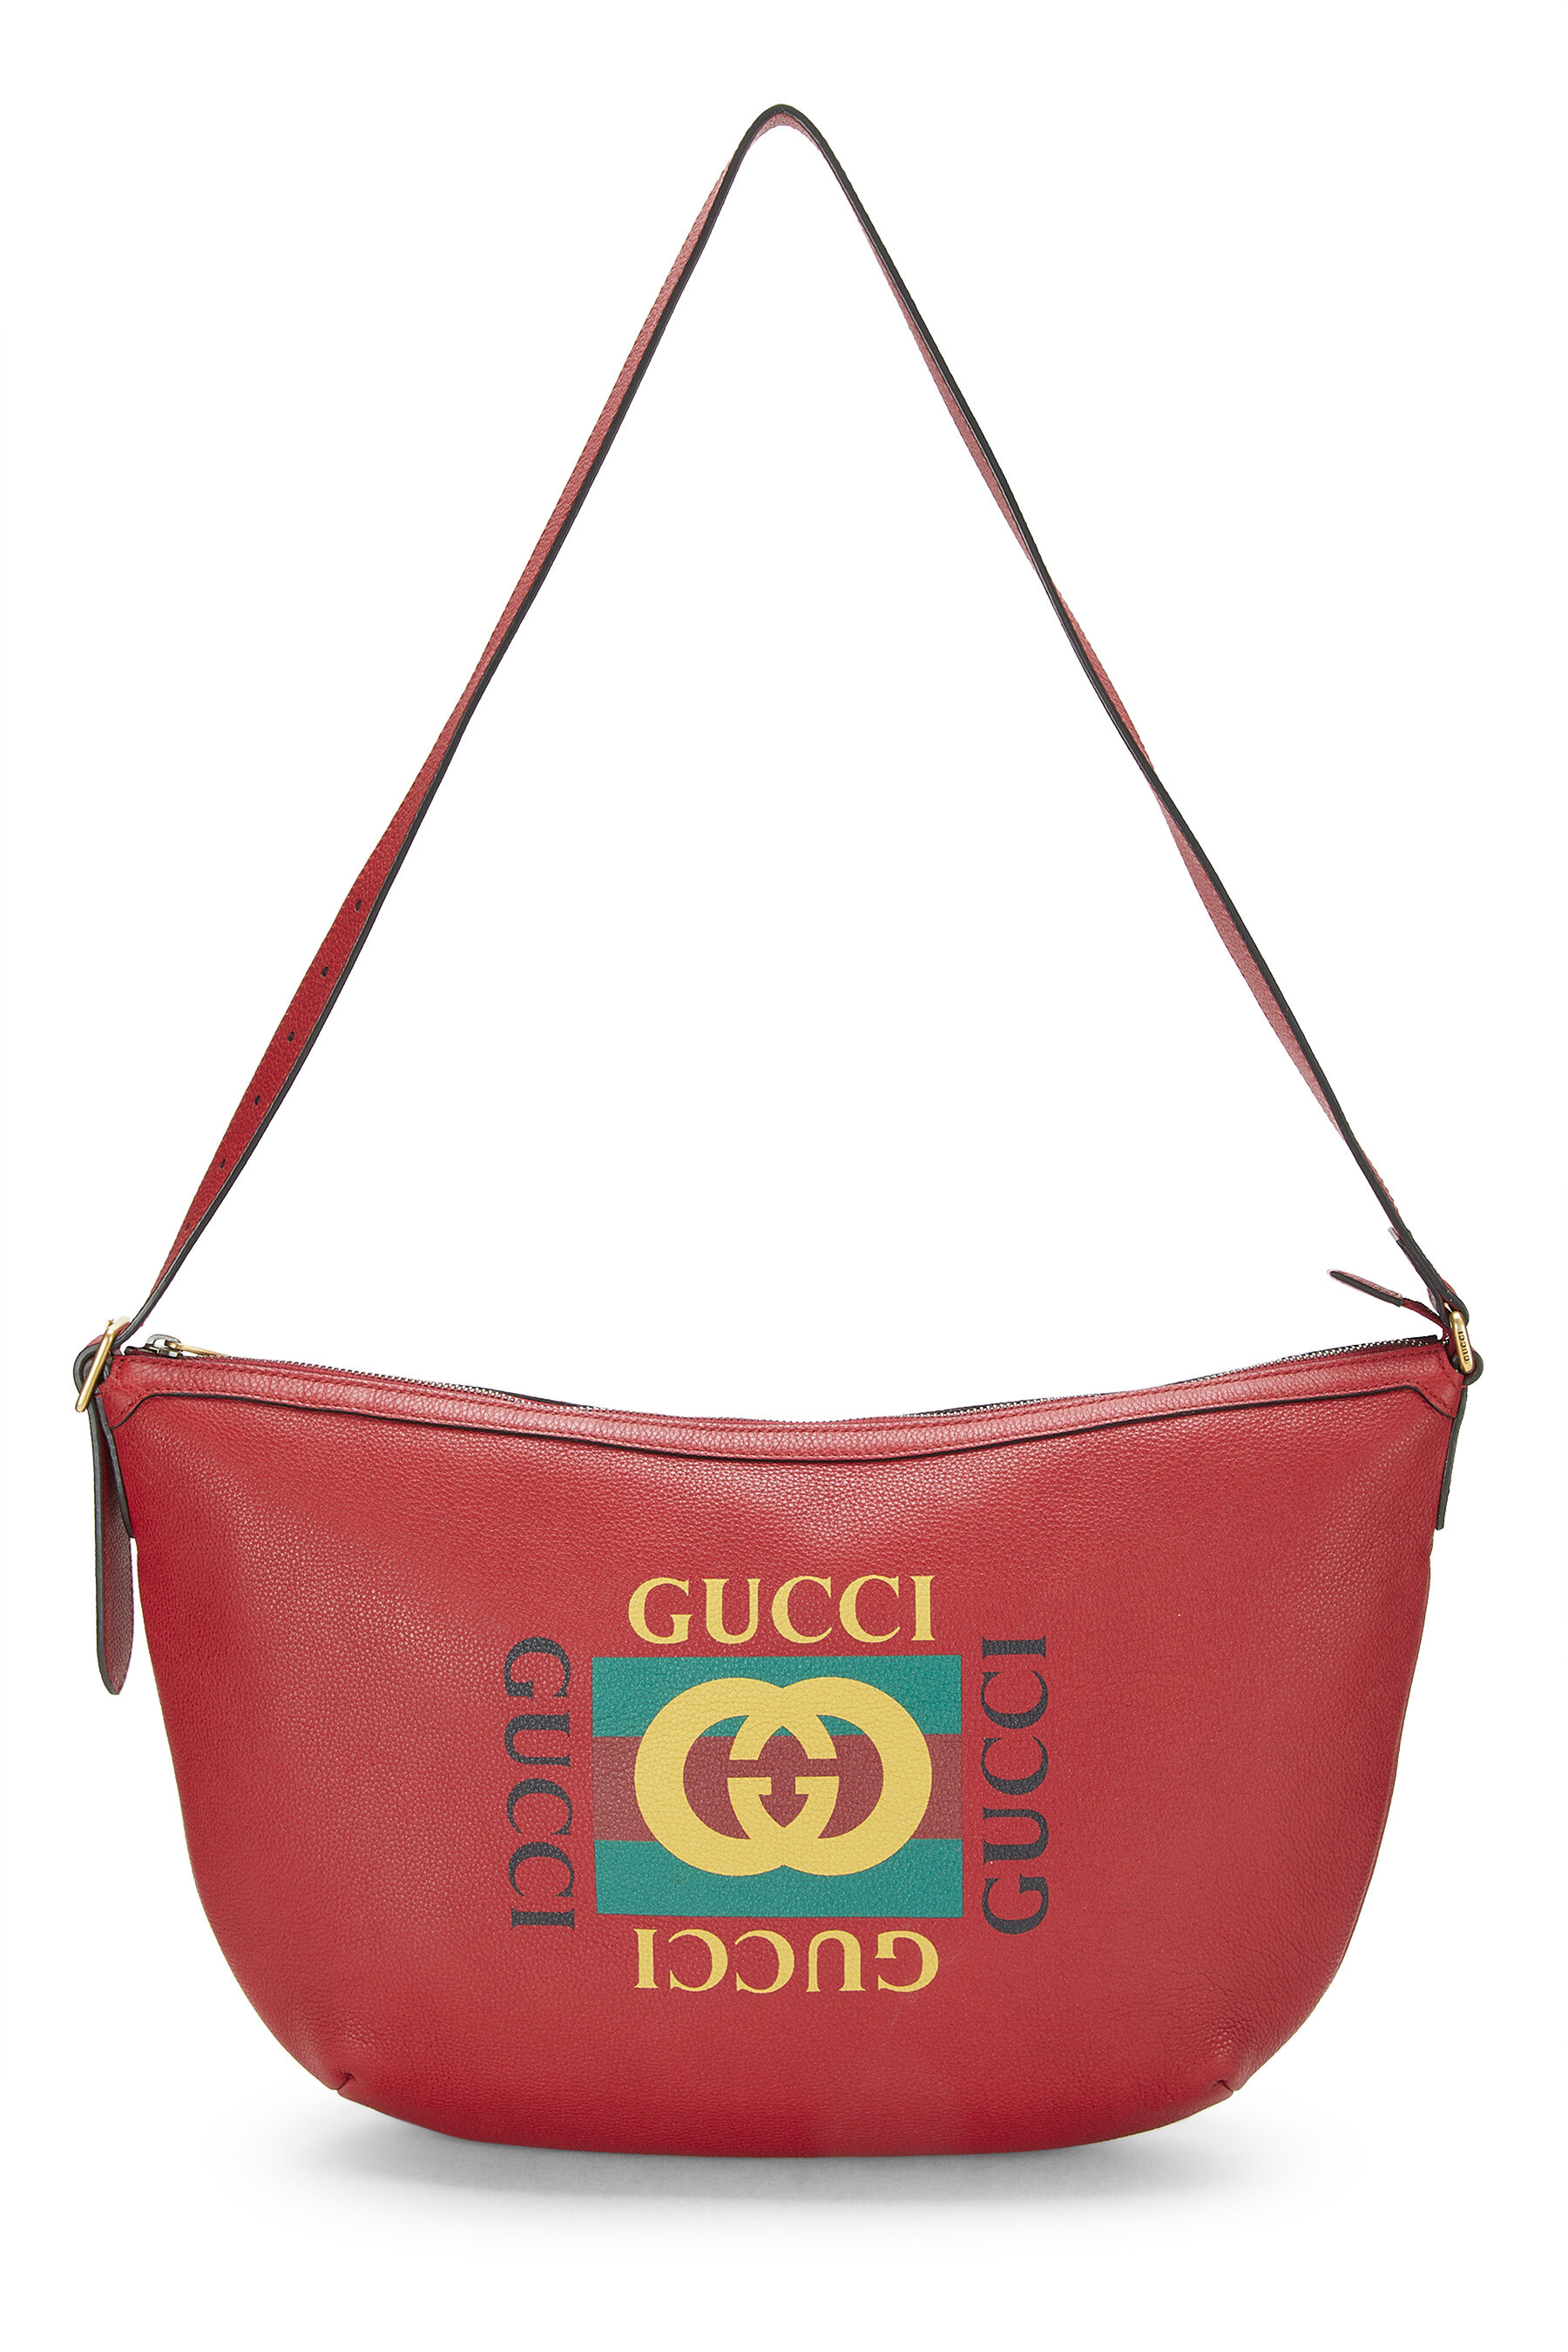 Pre-owned Gucci Red Grained Leather Logo Print Moon Hobo